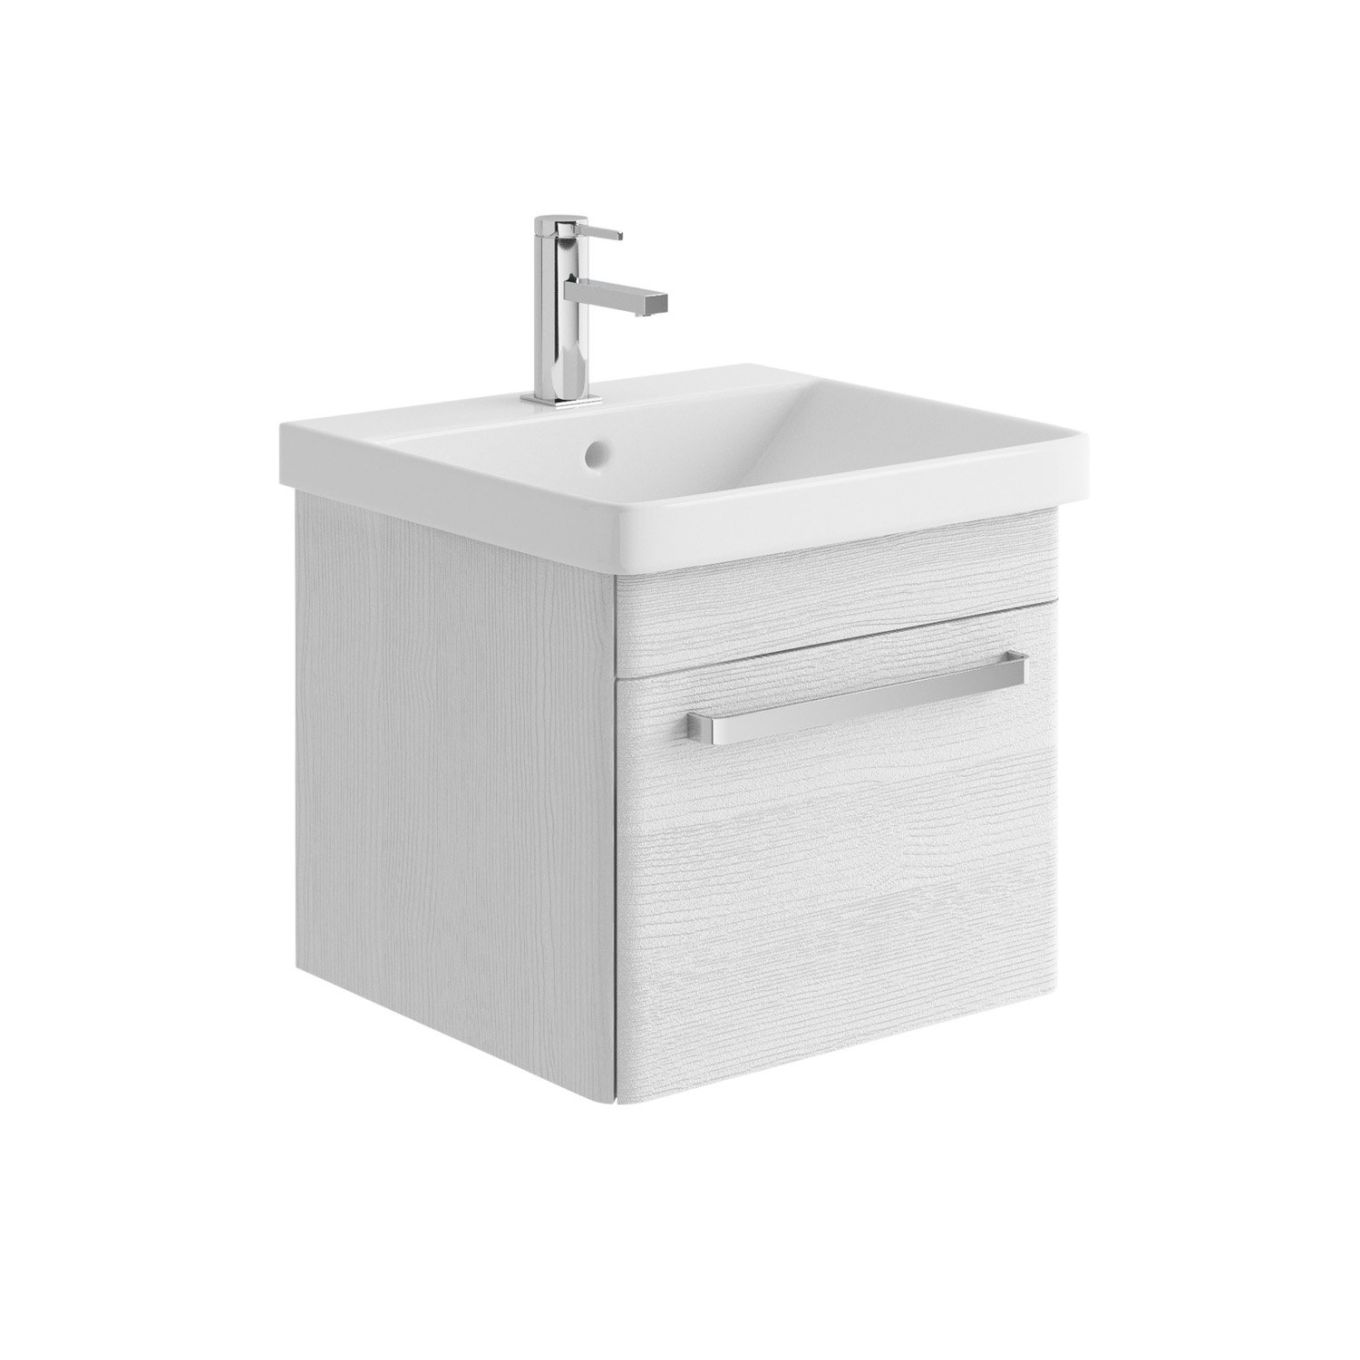 500mm Wall Mounted Vanity Unit & Basin in White